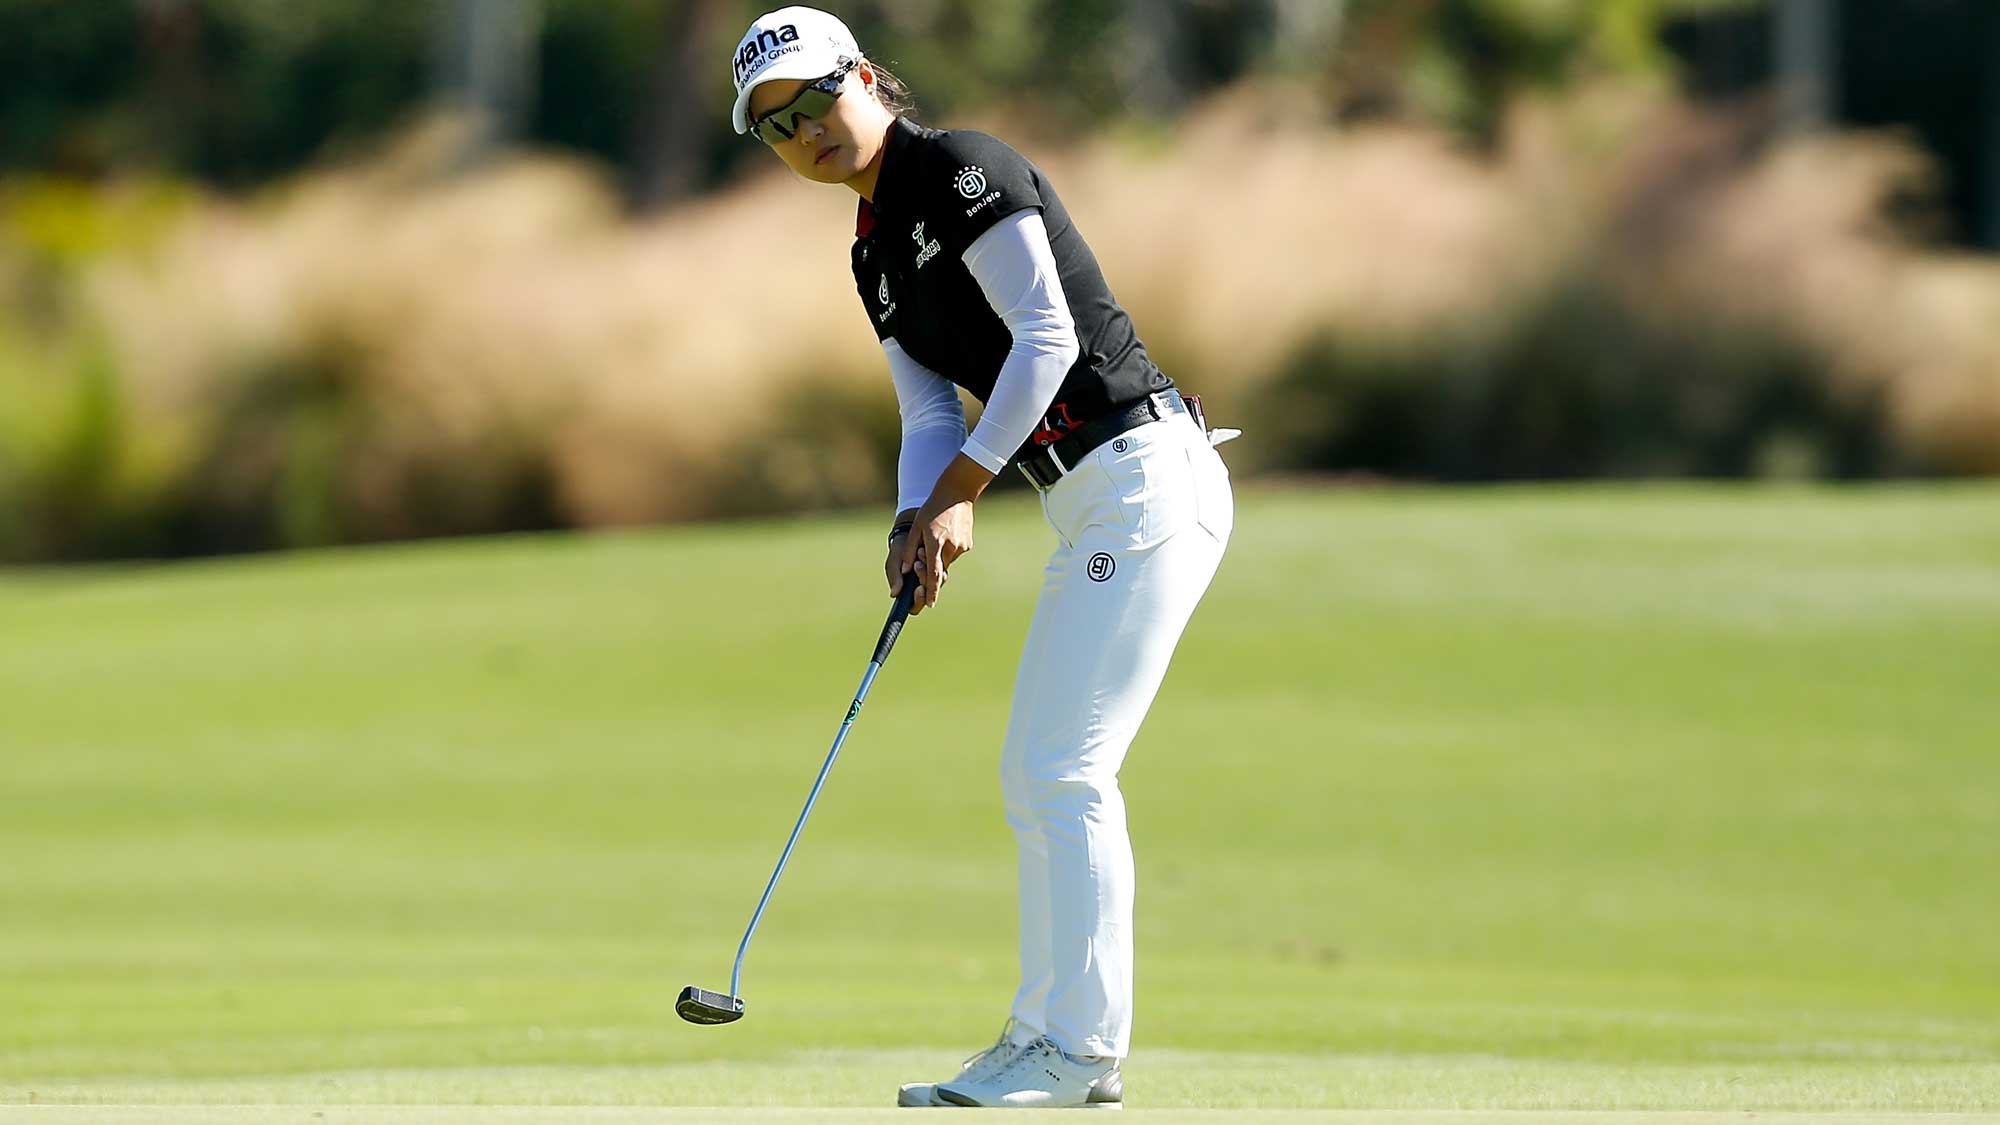 Minjee Lee of Australia putts on the tenth hole during the second round of the CME Group Tour Championship